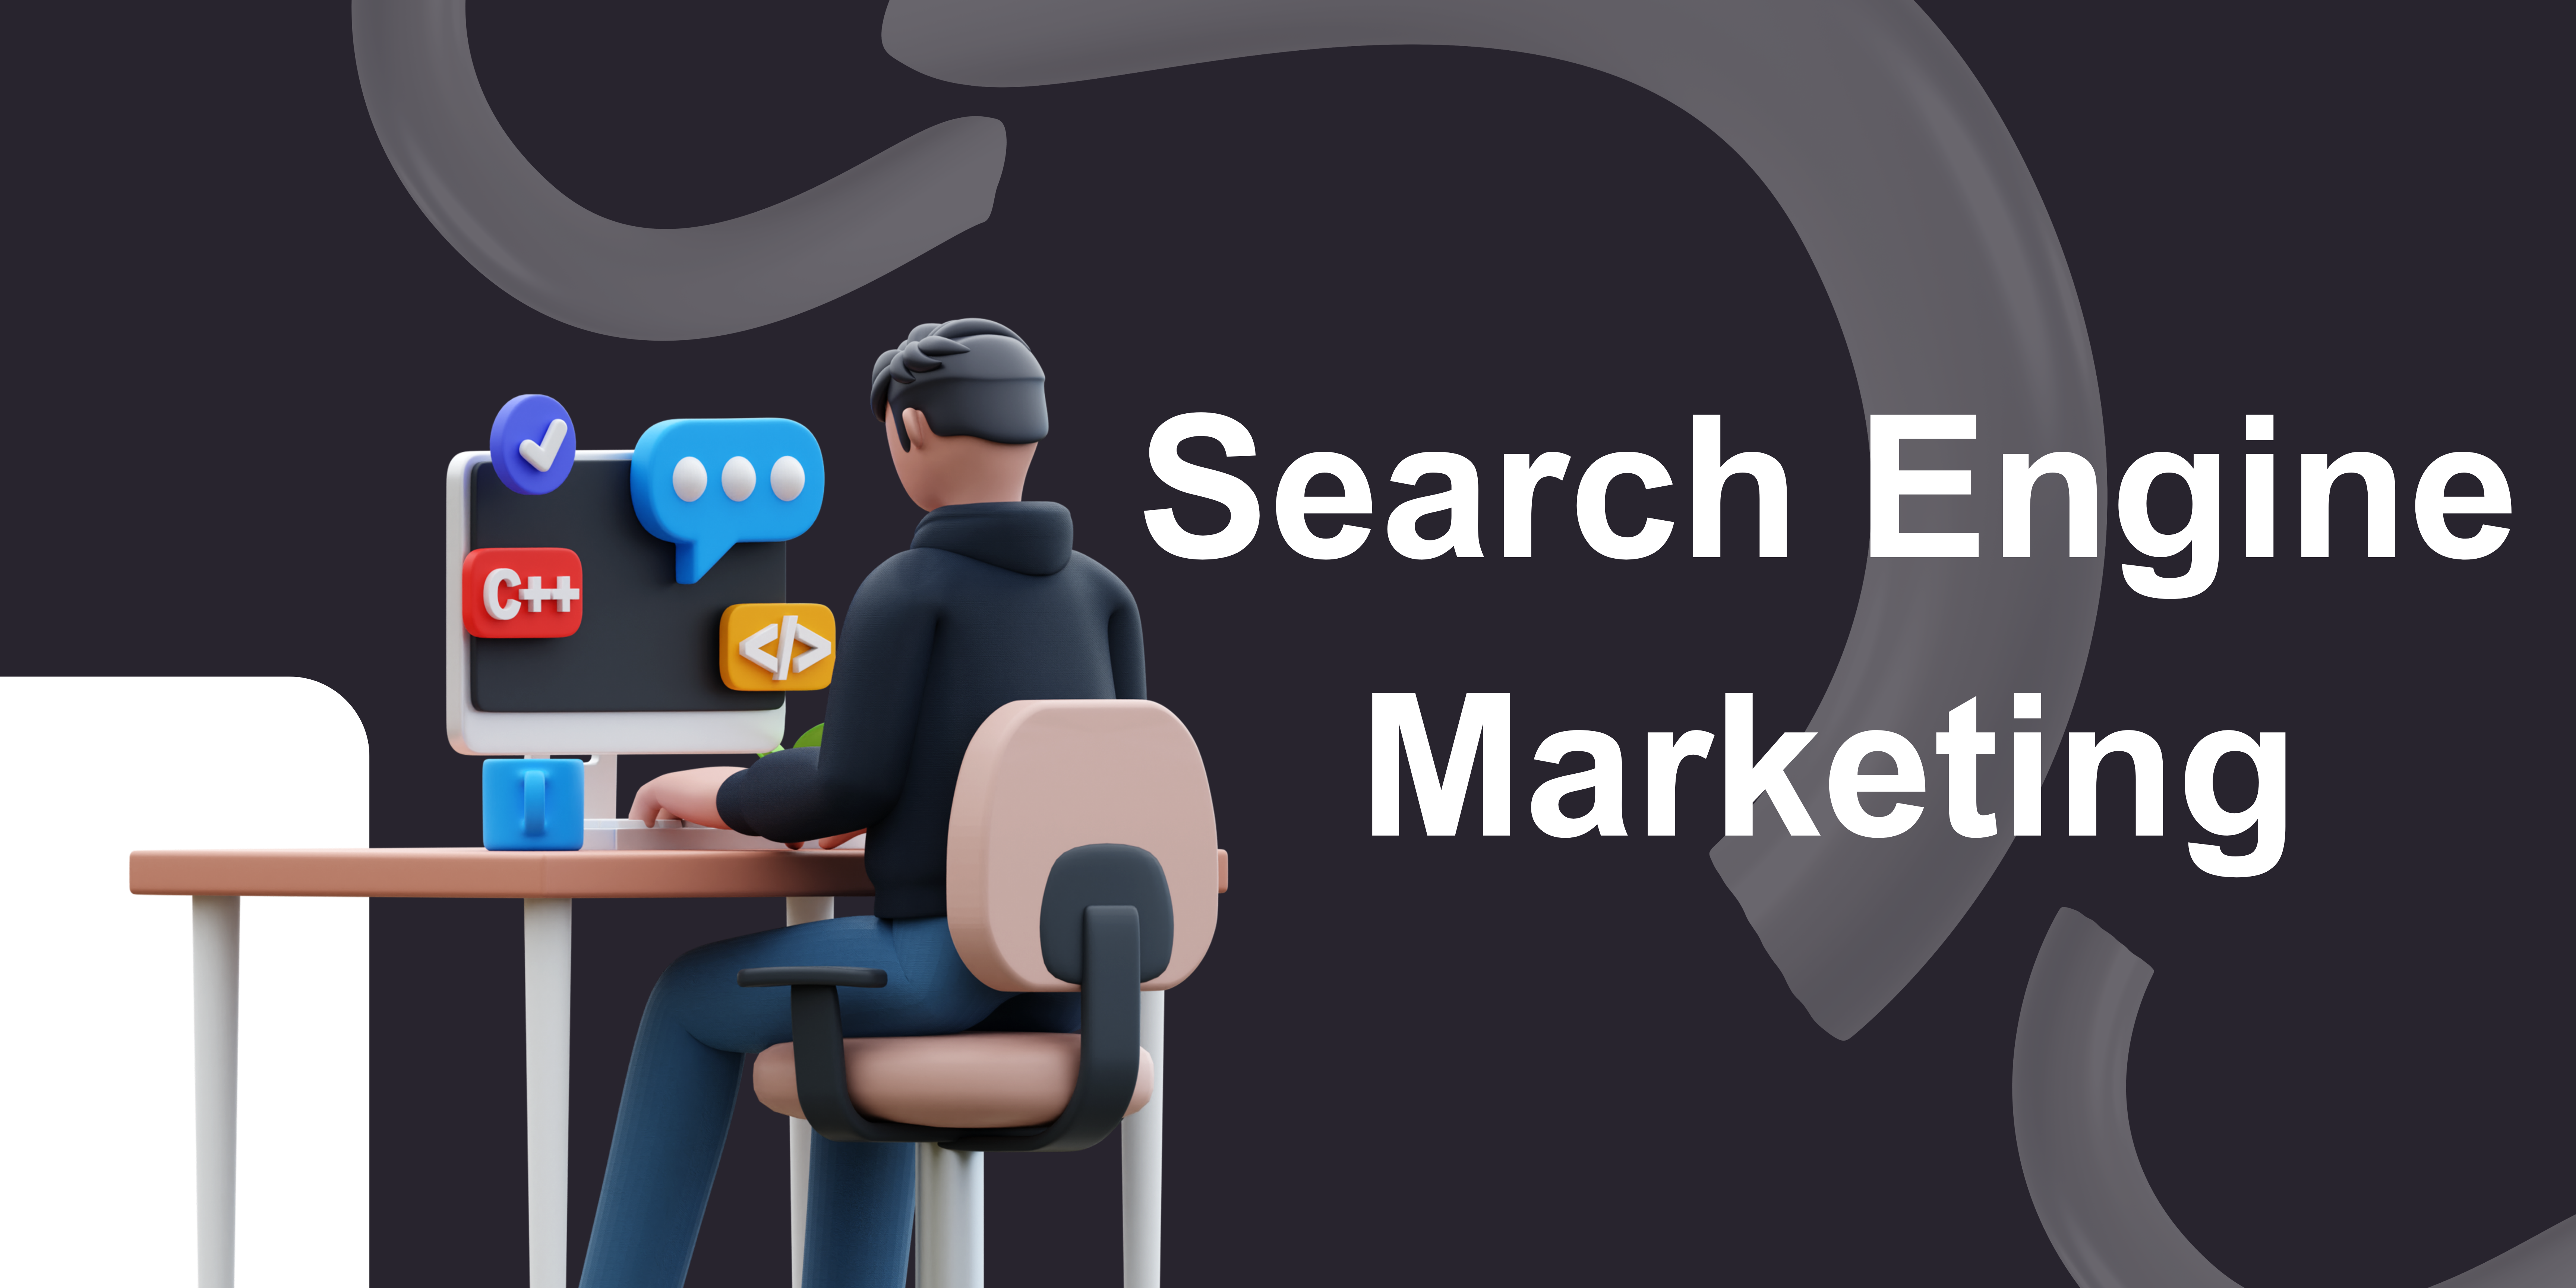 Search Engine Marketing (SEM): 4 Steps to Amplify Brand Visibility and Drive Traffic